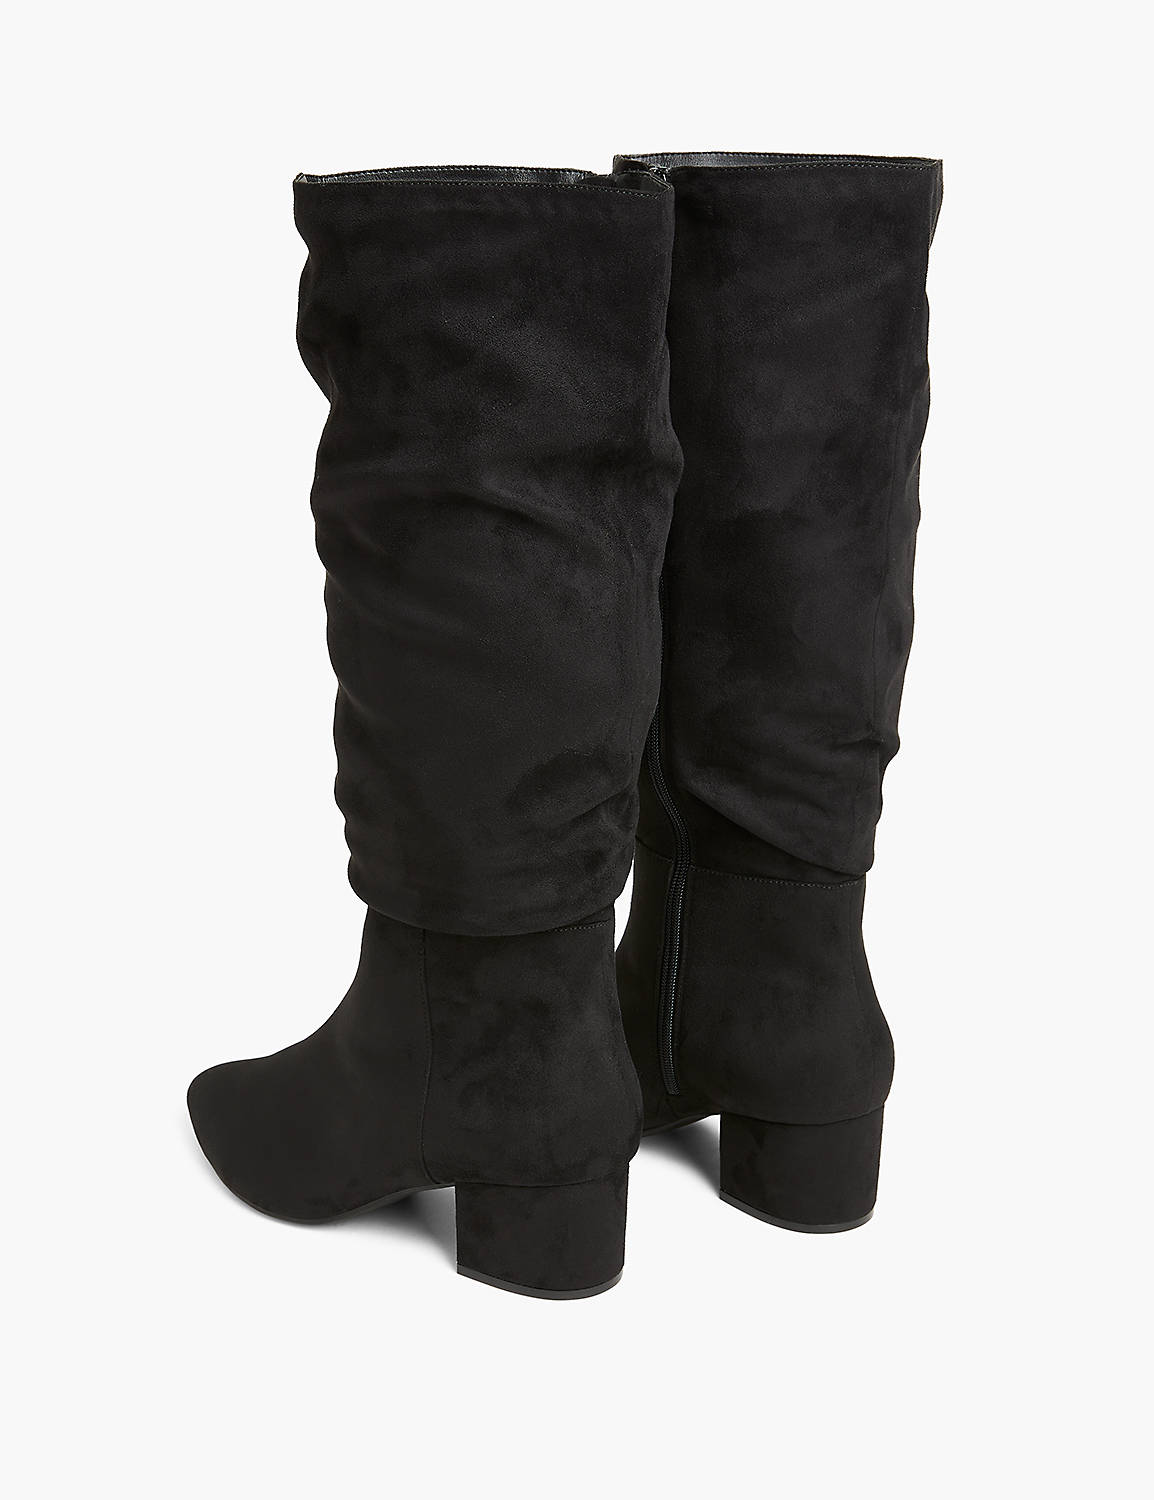 SLOUCHY TALL BOOT Product Image 2